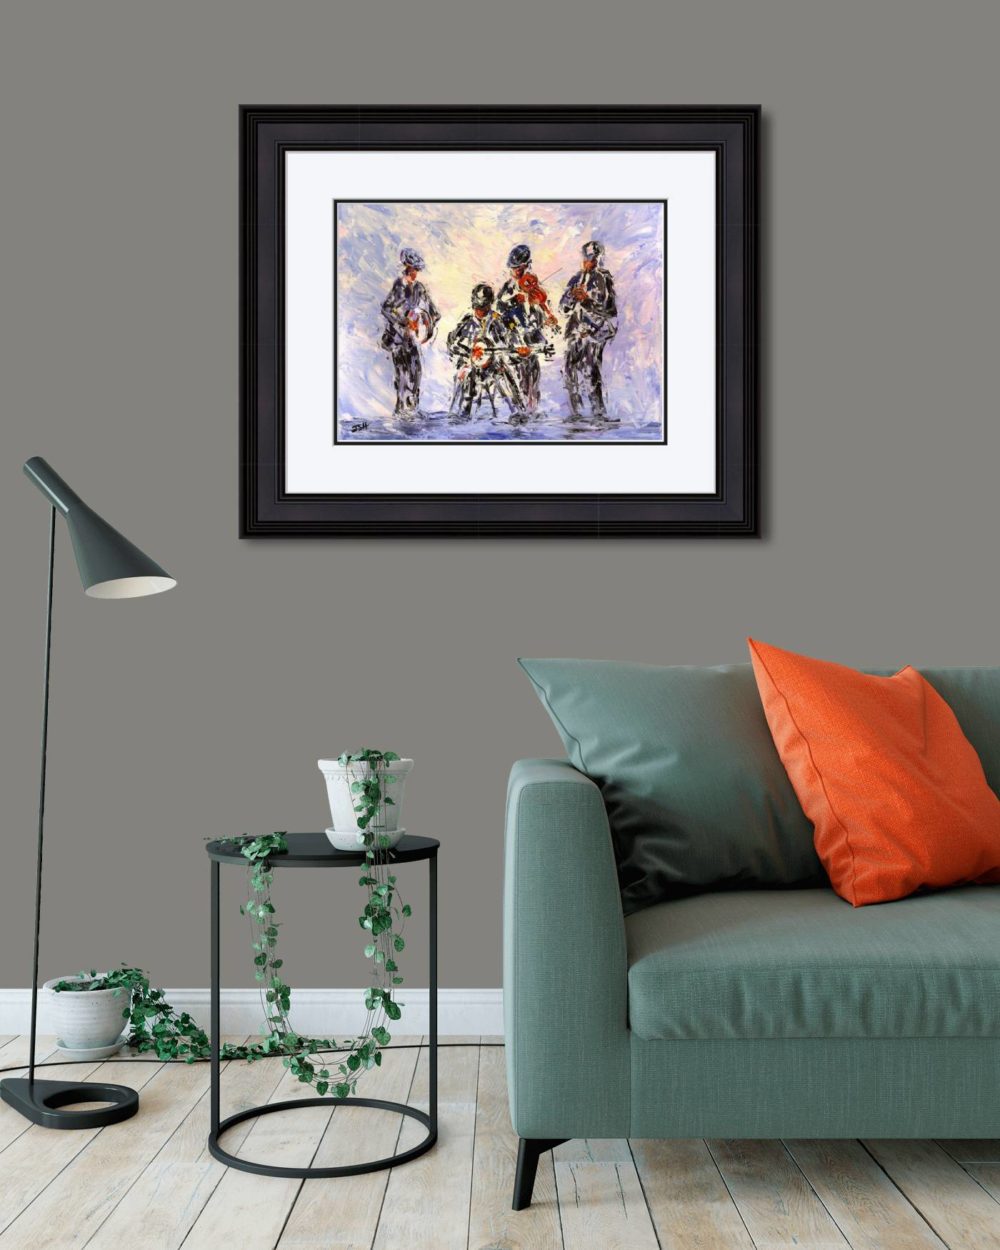 Music Session Print (Large) in Black Frame in Room